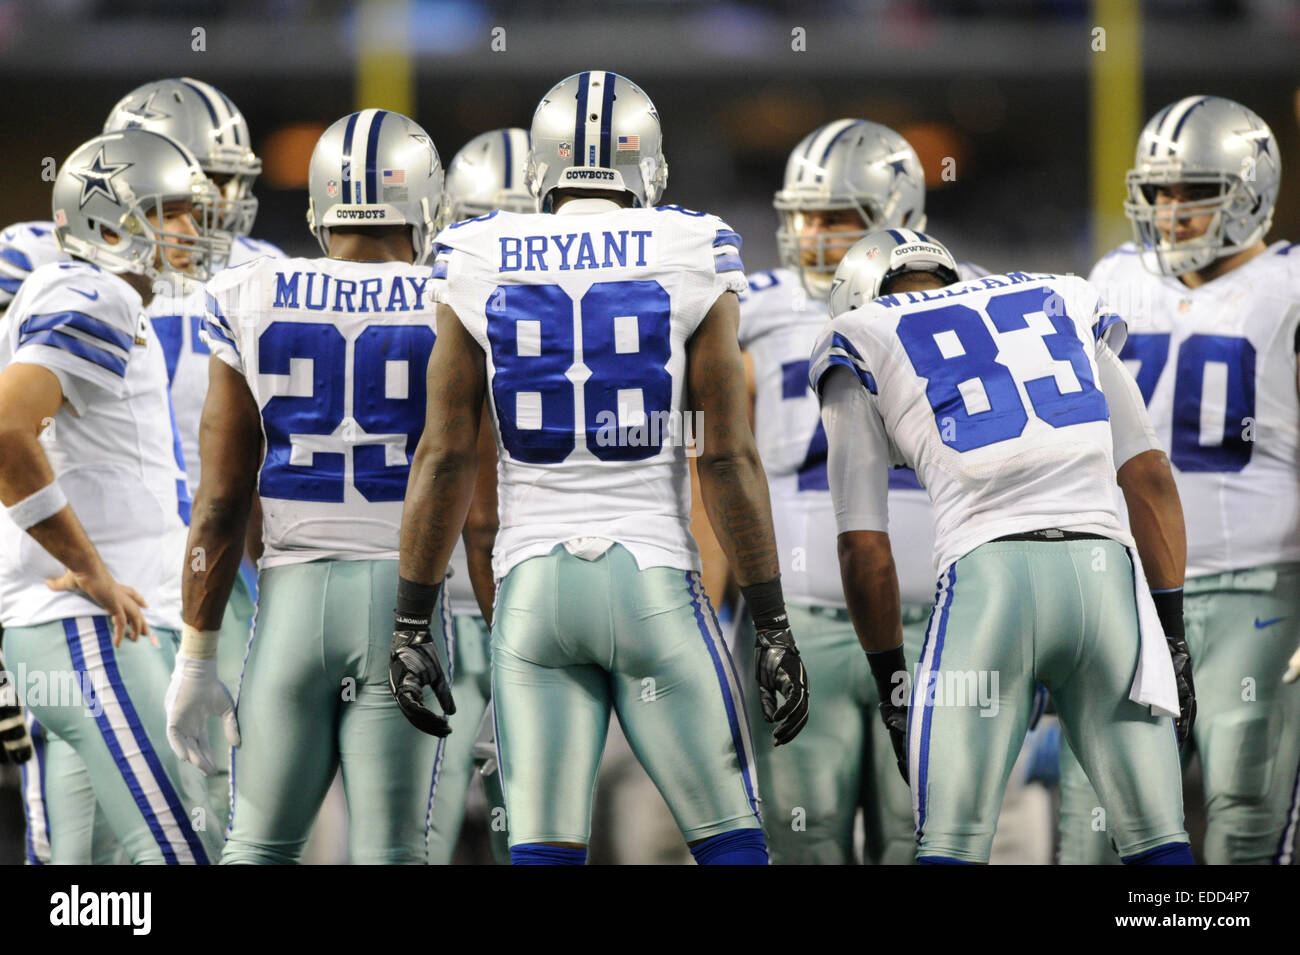 January 04, 2015: Dallas Cowboys running back DeMarco Murray #29, Dallas  Cowboys wide receiver Dez Bryant #88, Dallas Cowboys wide receiver Terrance  Williams #83 in the huddle during an NFL Playoff football